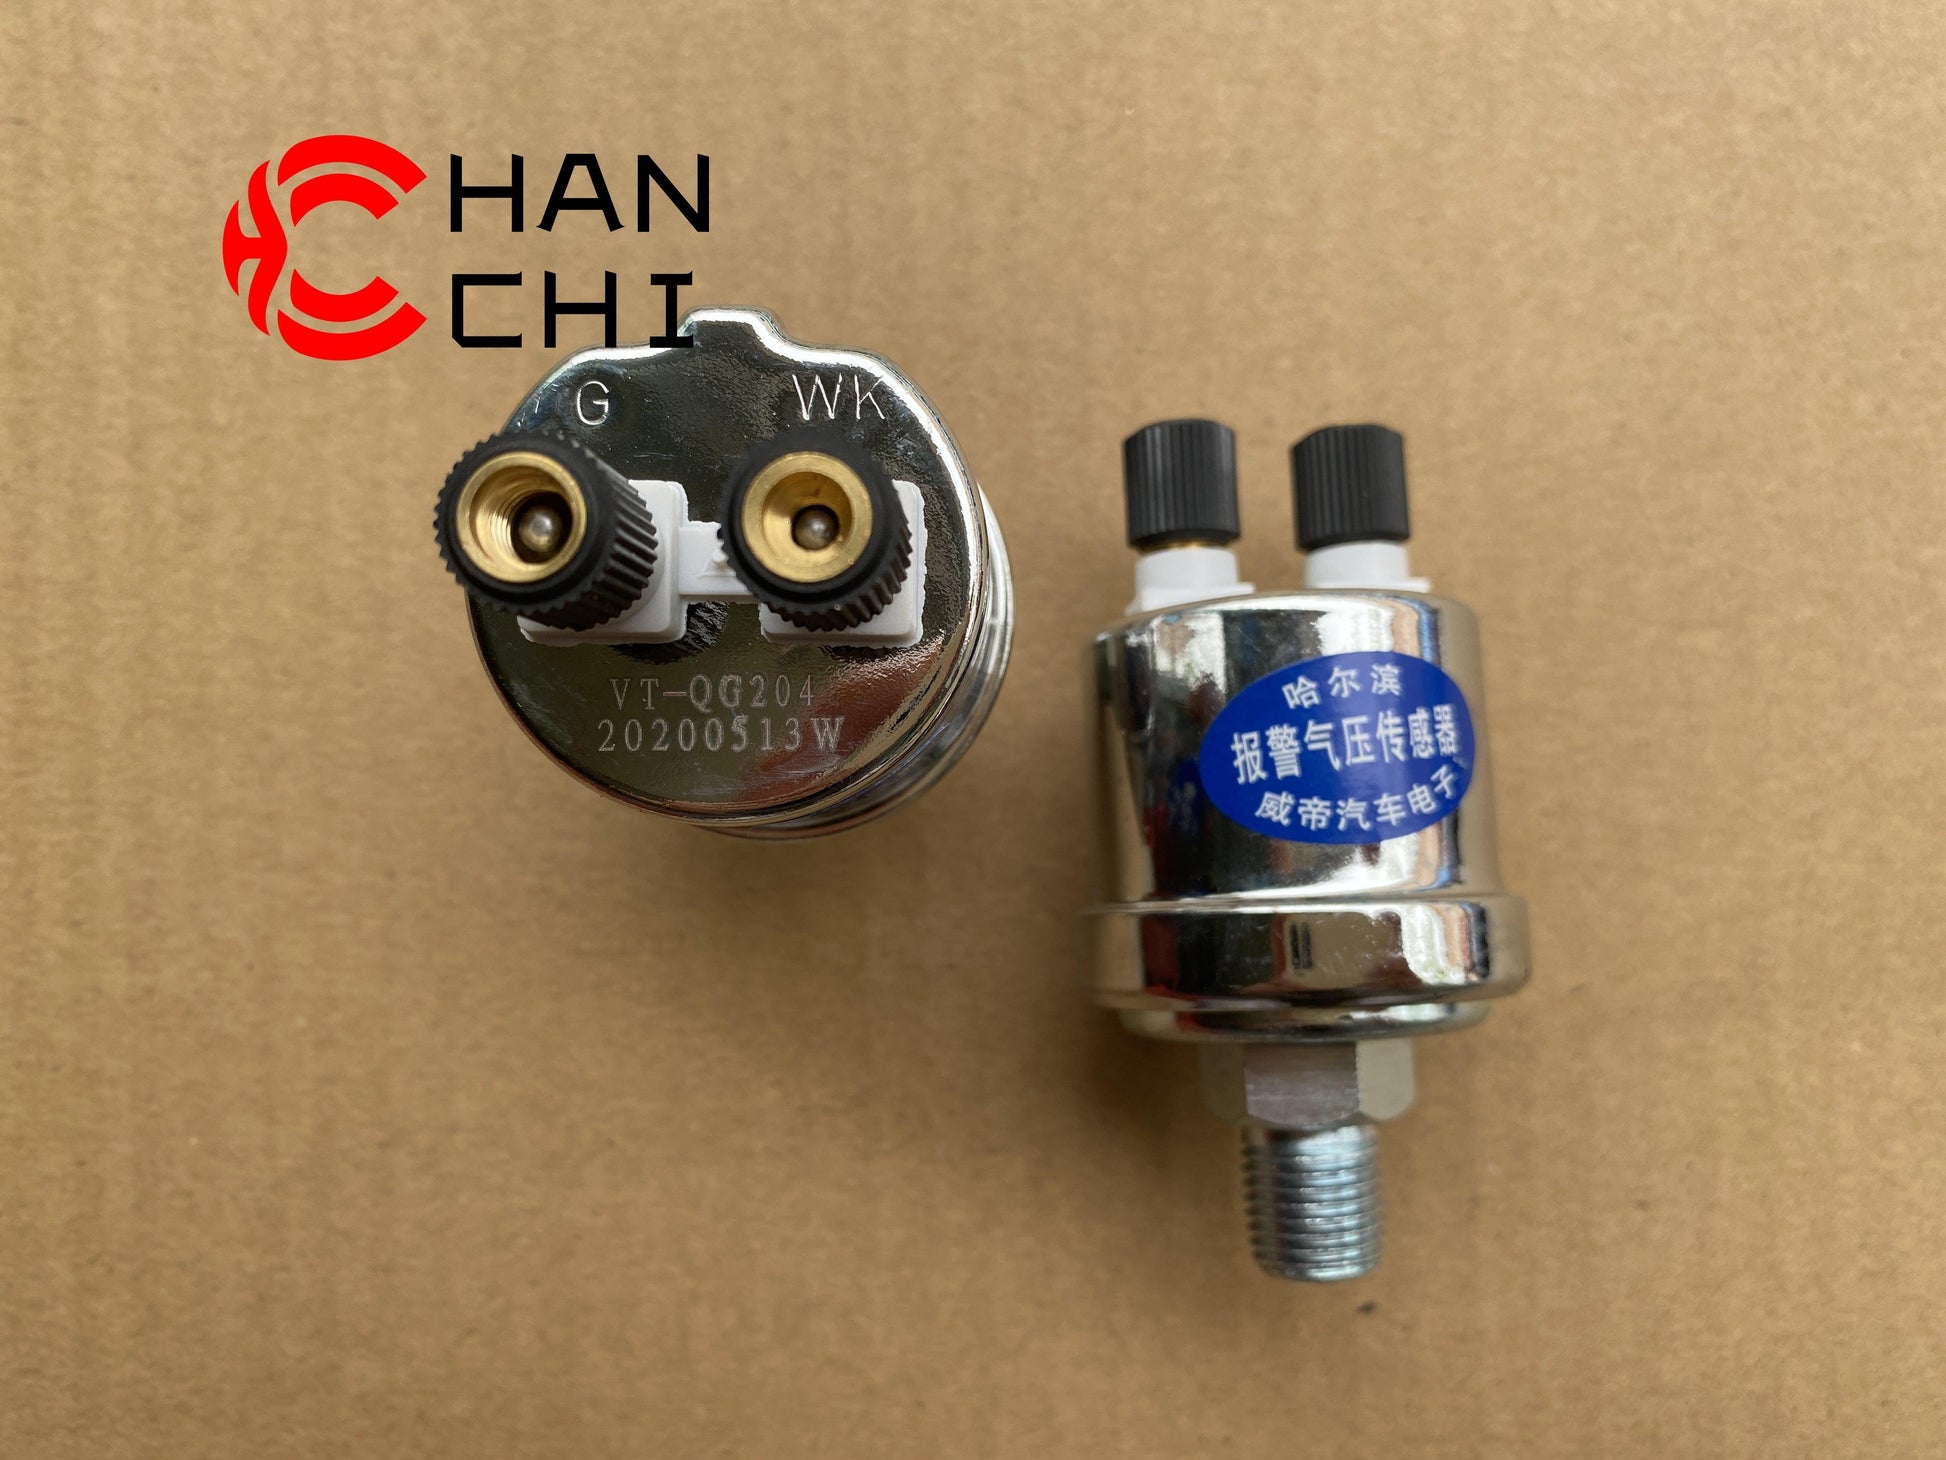 【Description】---☀Welcome to HANCHI☀---✔Good Quality✔Generally Applicability✔Competitive PriceEnjoy your shopping time↖（^ω^）↗【Features】Brand-New with High Quality for the Aftermarket.Totally mathced your need.**Stable Quality**High Precision**Easy Installation**【Specification】OEM: VT-QG204Material: metalColor: silverOrigin: Made in ChinaWeight: 100g【Packing List】1* Gas Pressure Sensor 【More Service】 We can provide OEM Manufacturing service We can Be your one-step solution for Auto Parts We can pr